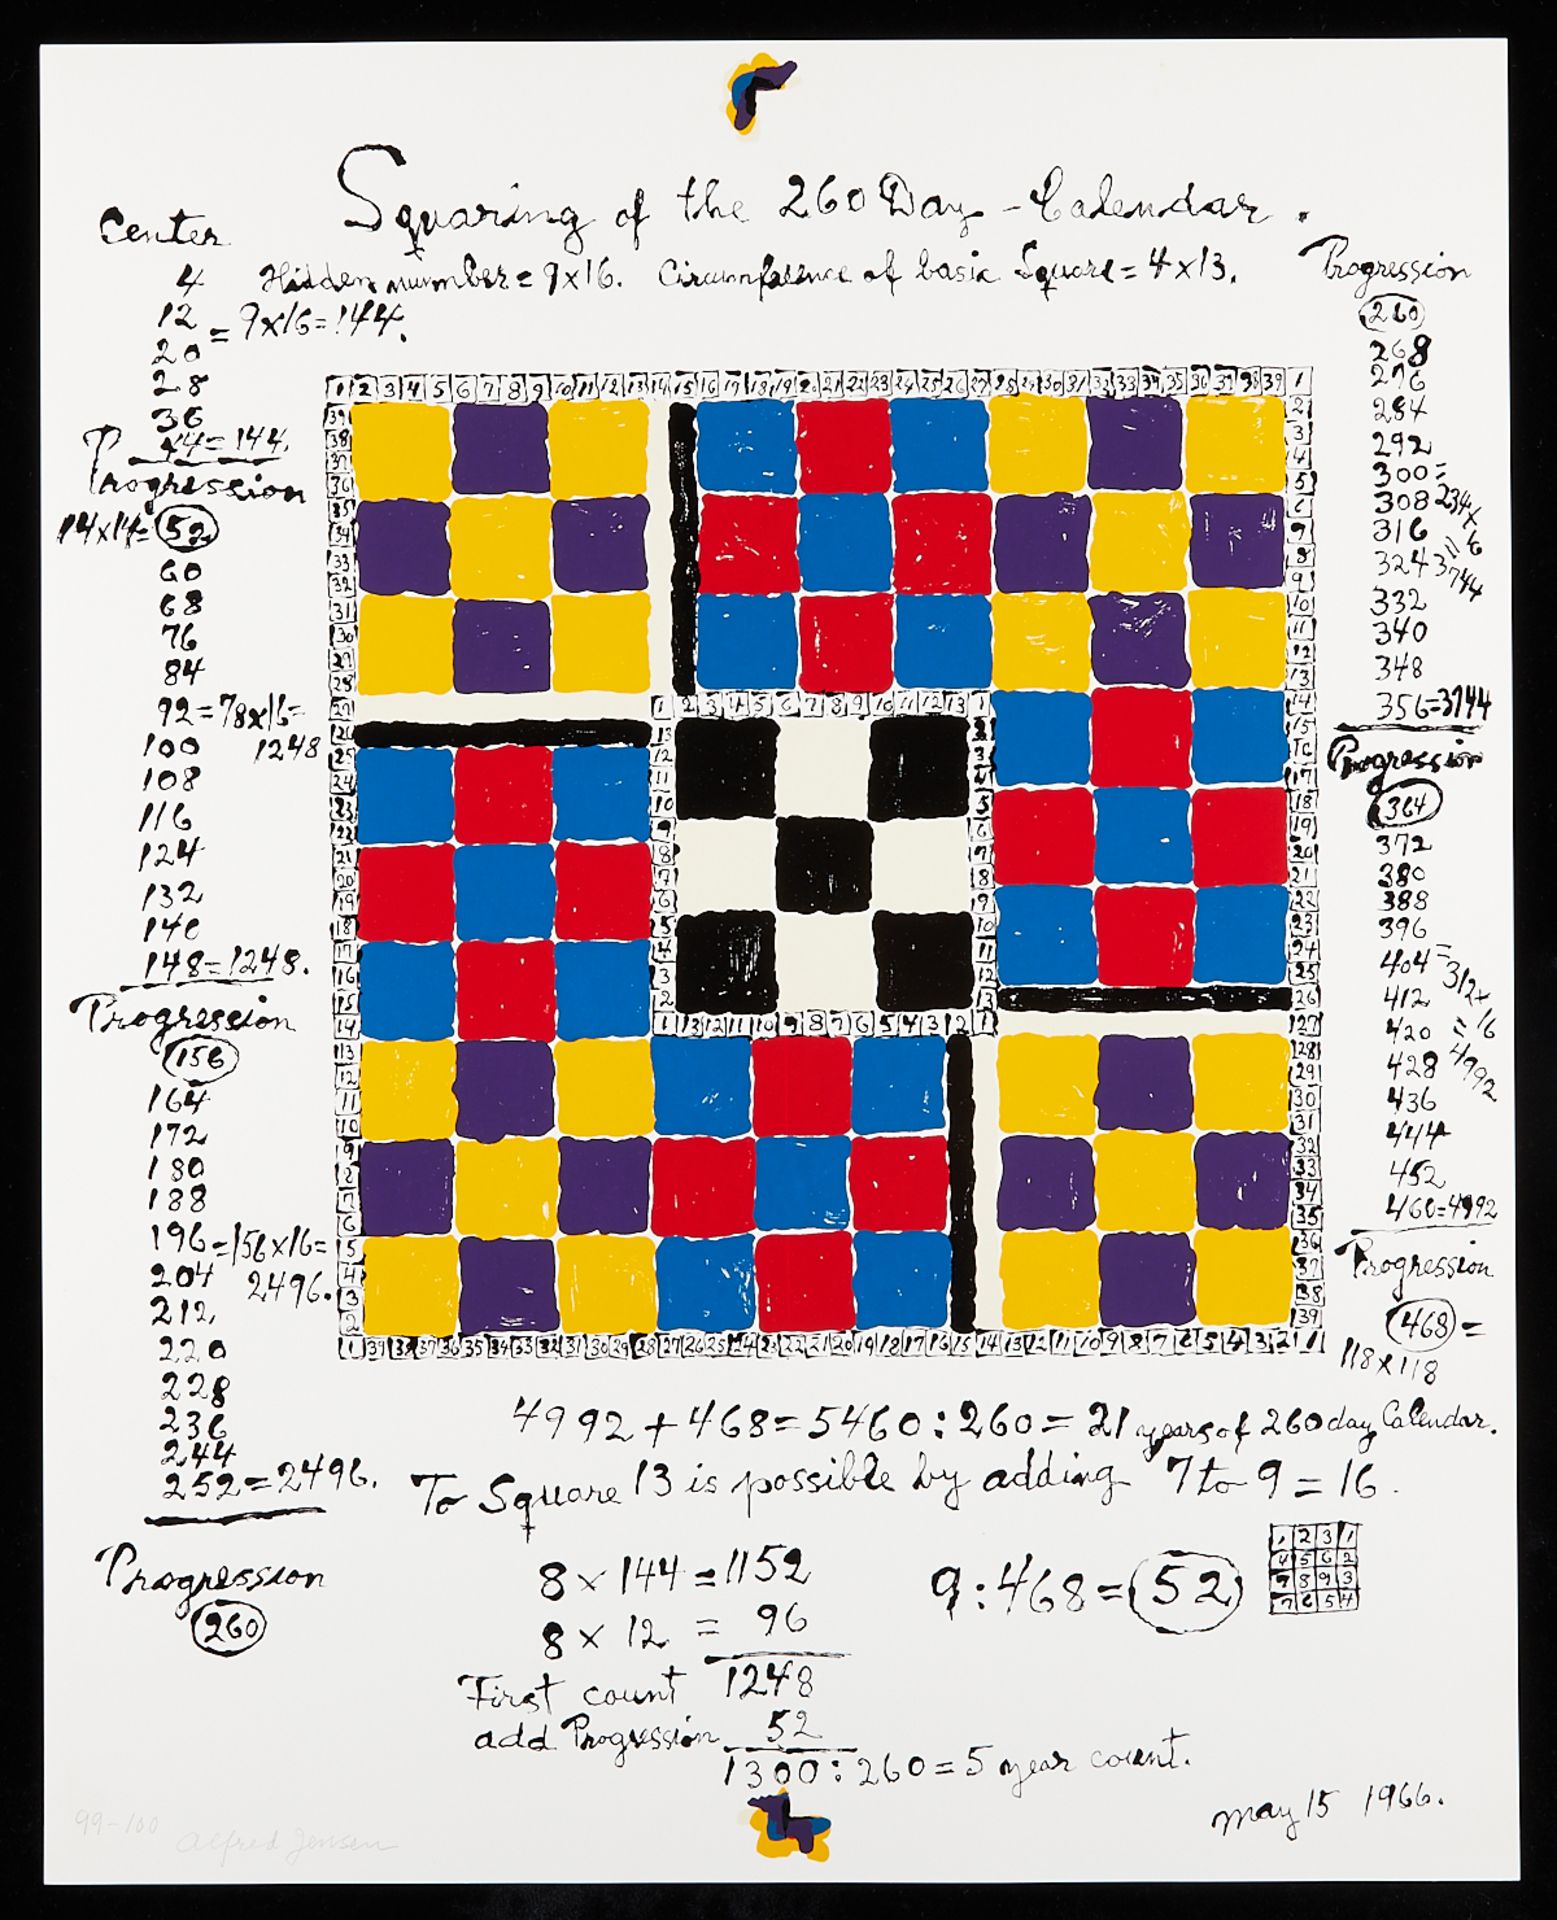 Alfred Jensen "Squaring of the 260-Day Calendar" - Image 2 of 4